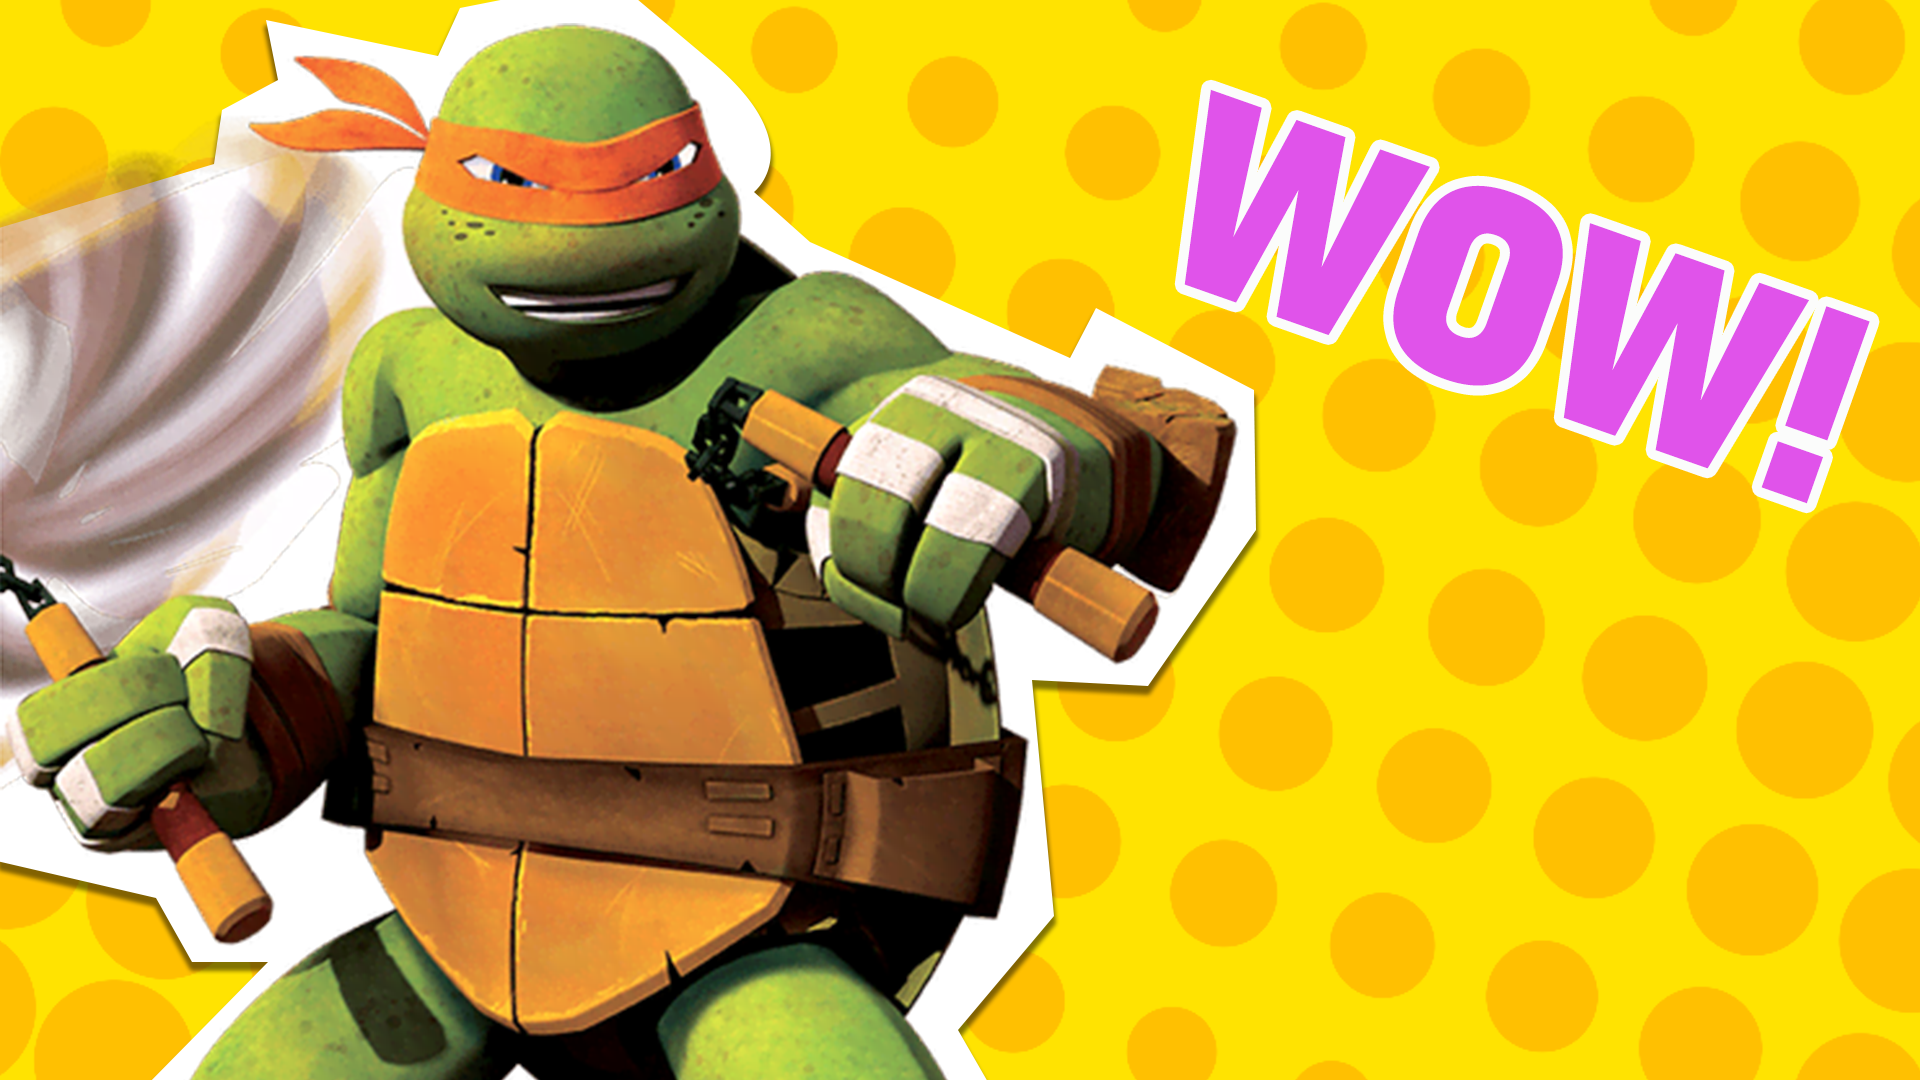 Incredible! You're officially the number one expert on the villains in the TMNT universe! Congrats!